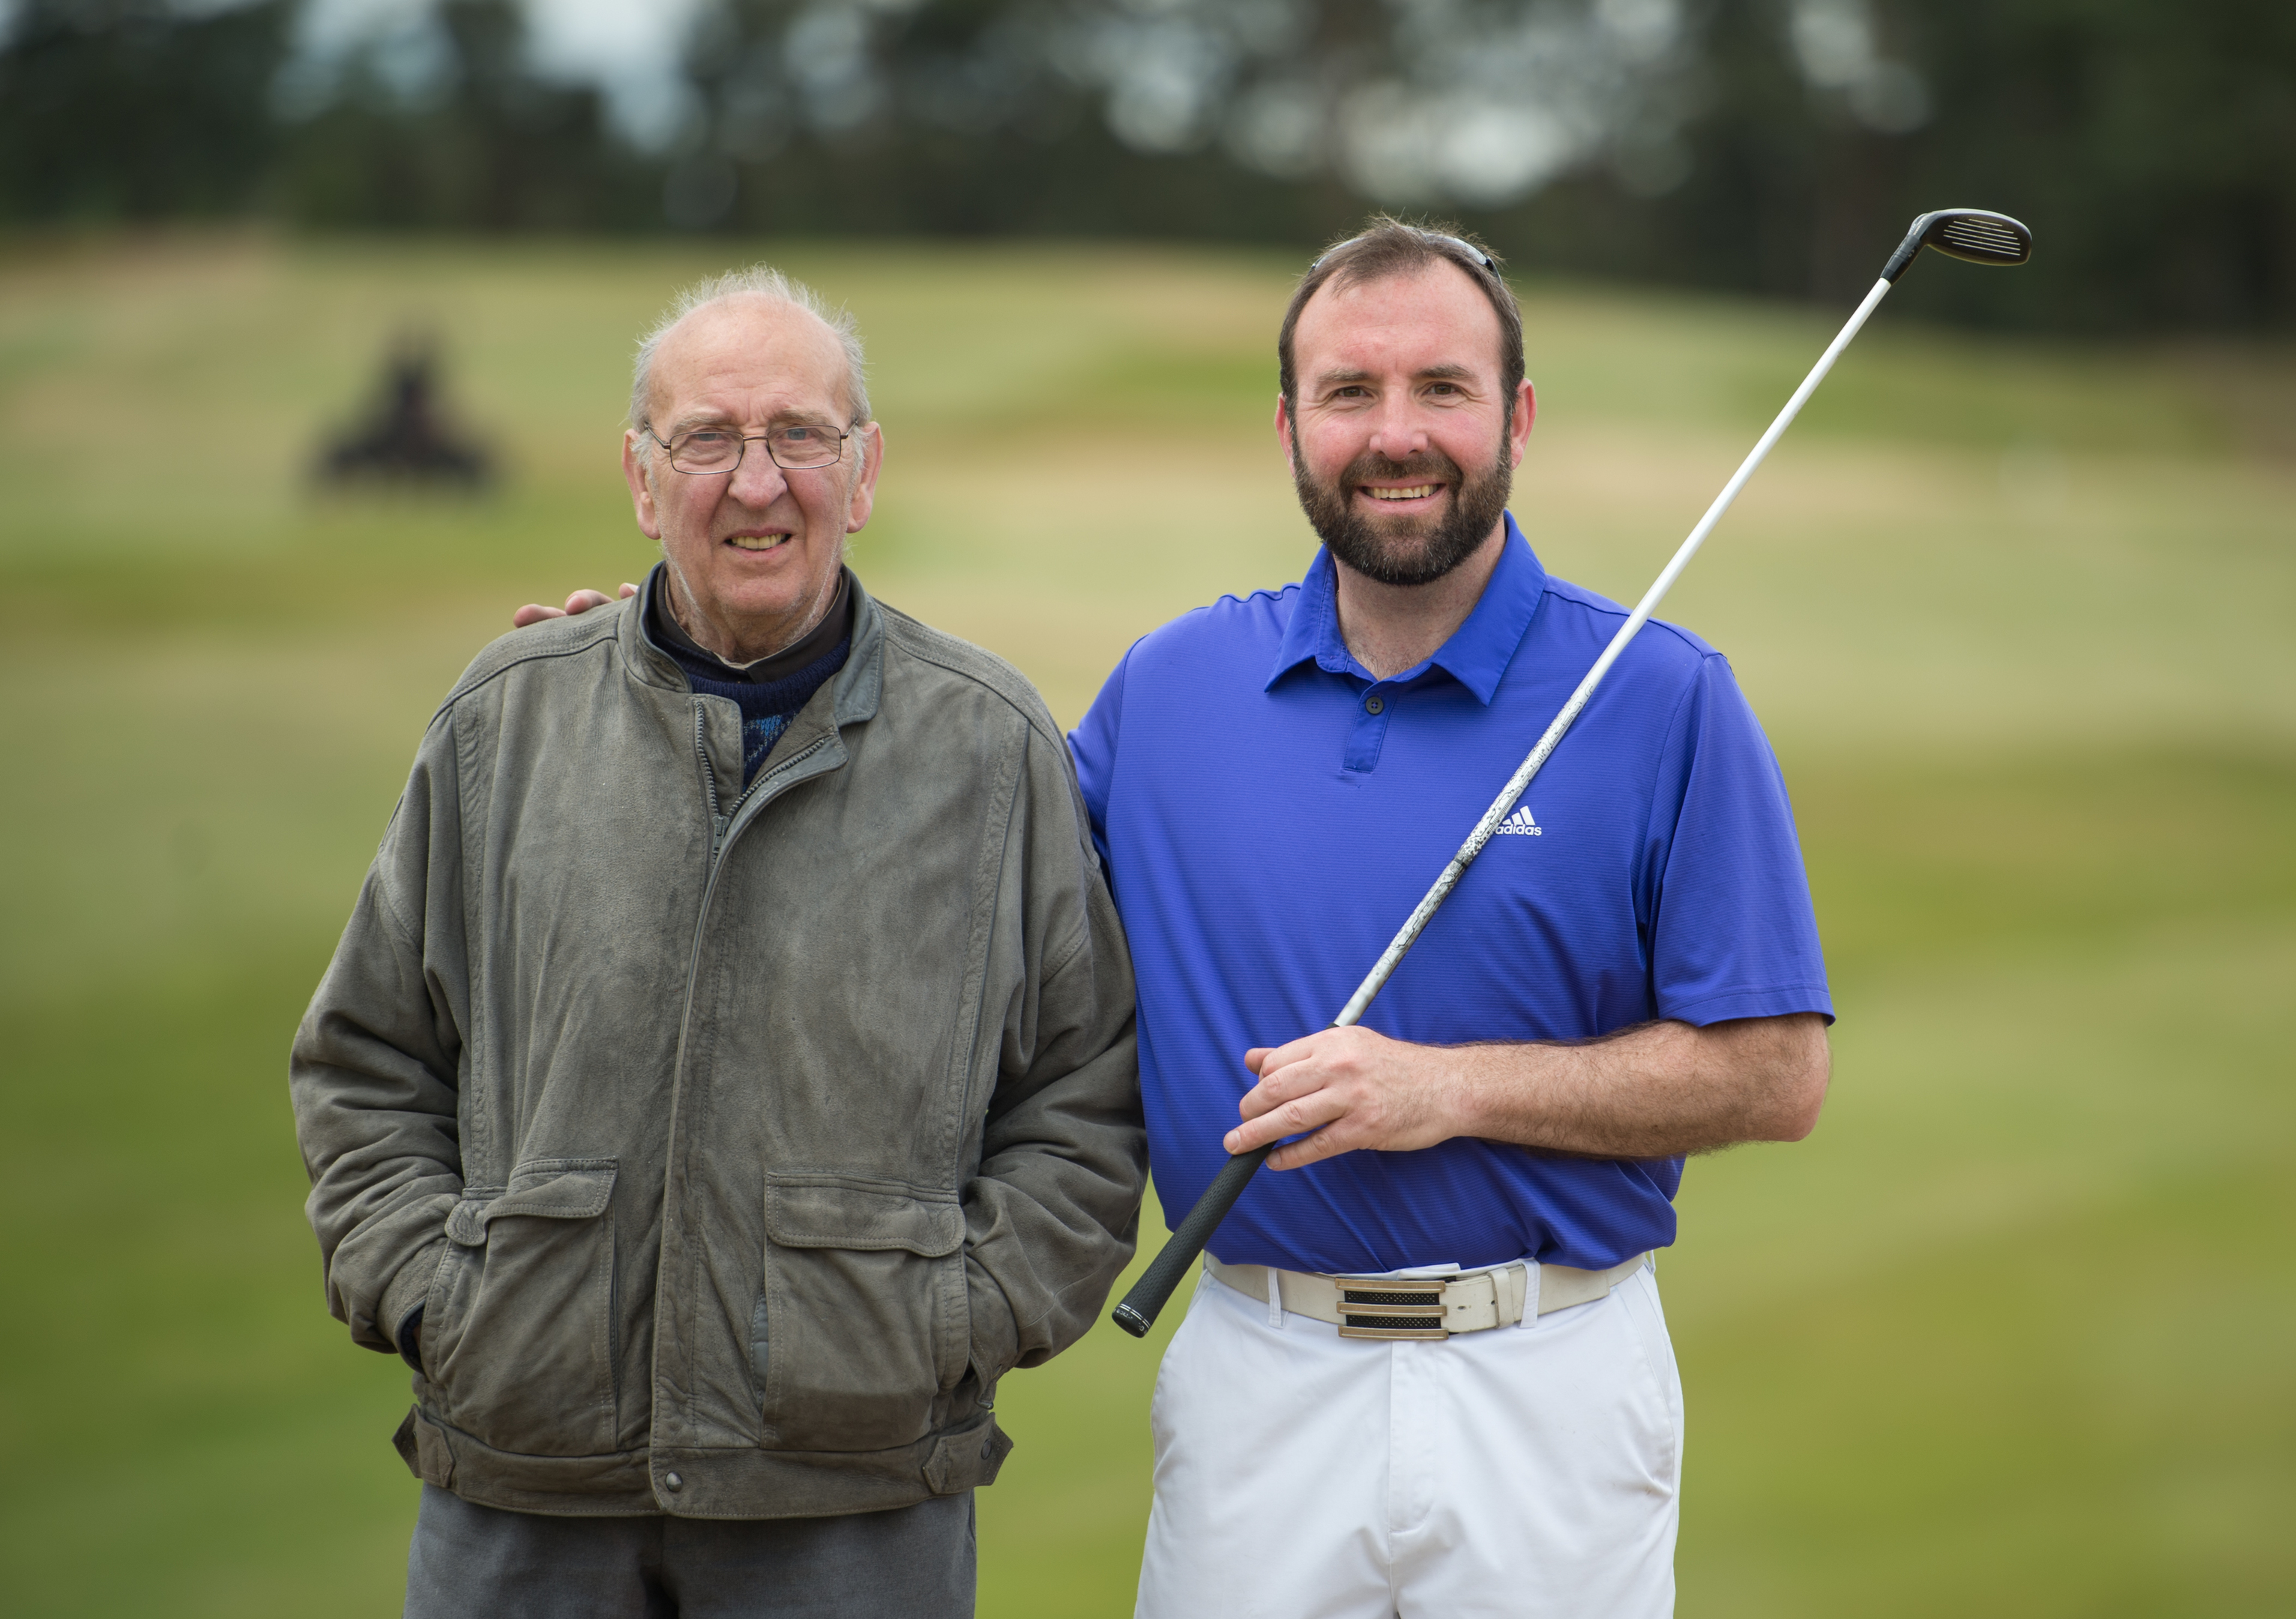 Bryan Fotheringham at Forres Golf Course with his father Richard Fotheringham, also pictured.